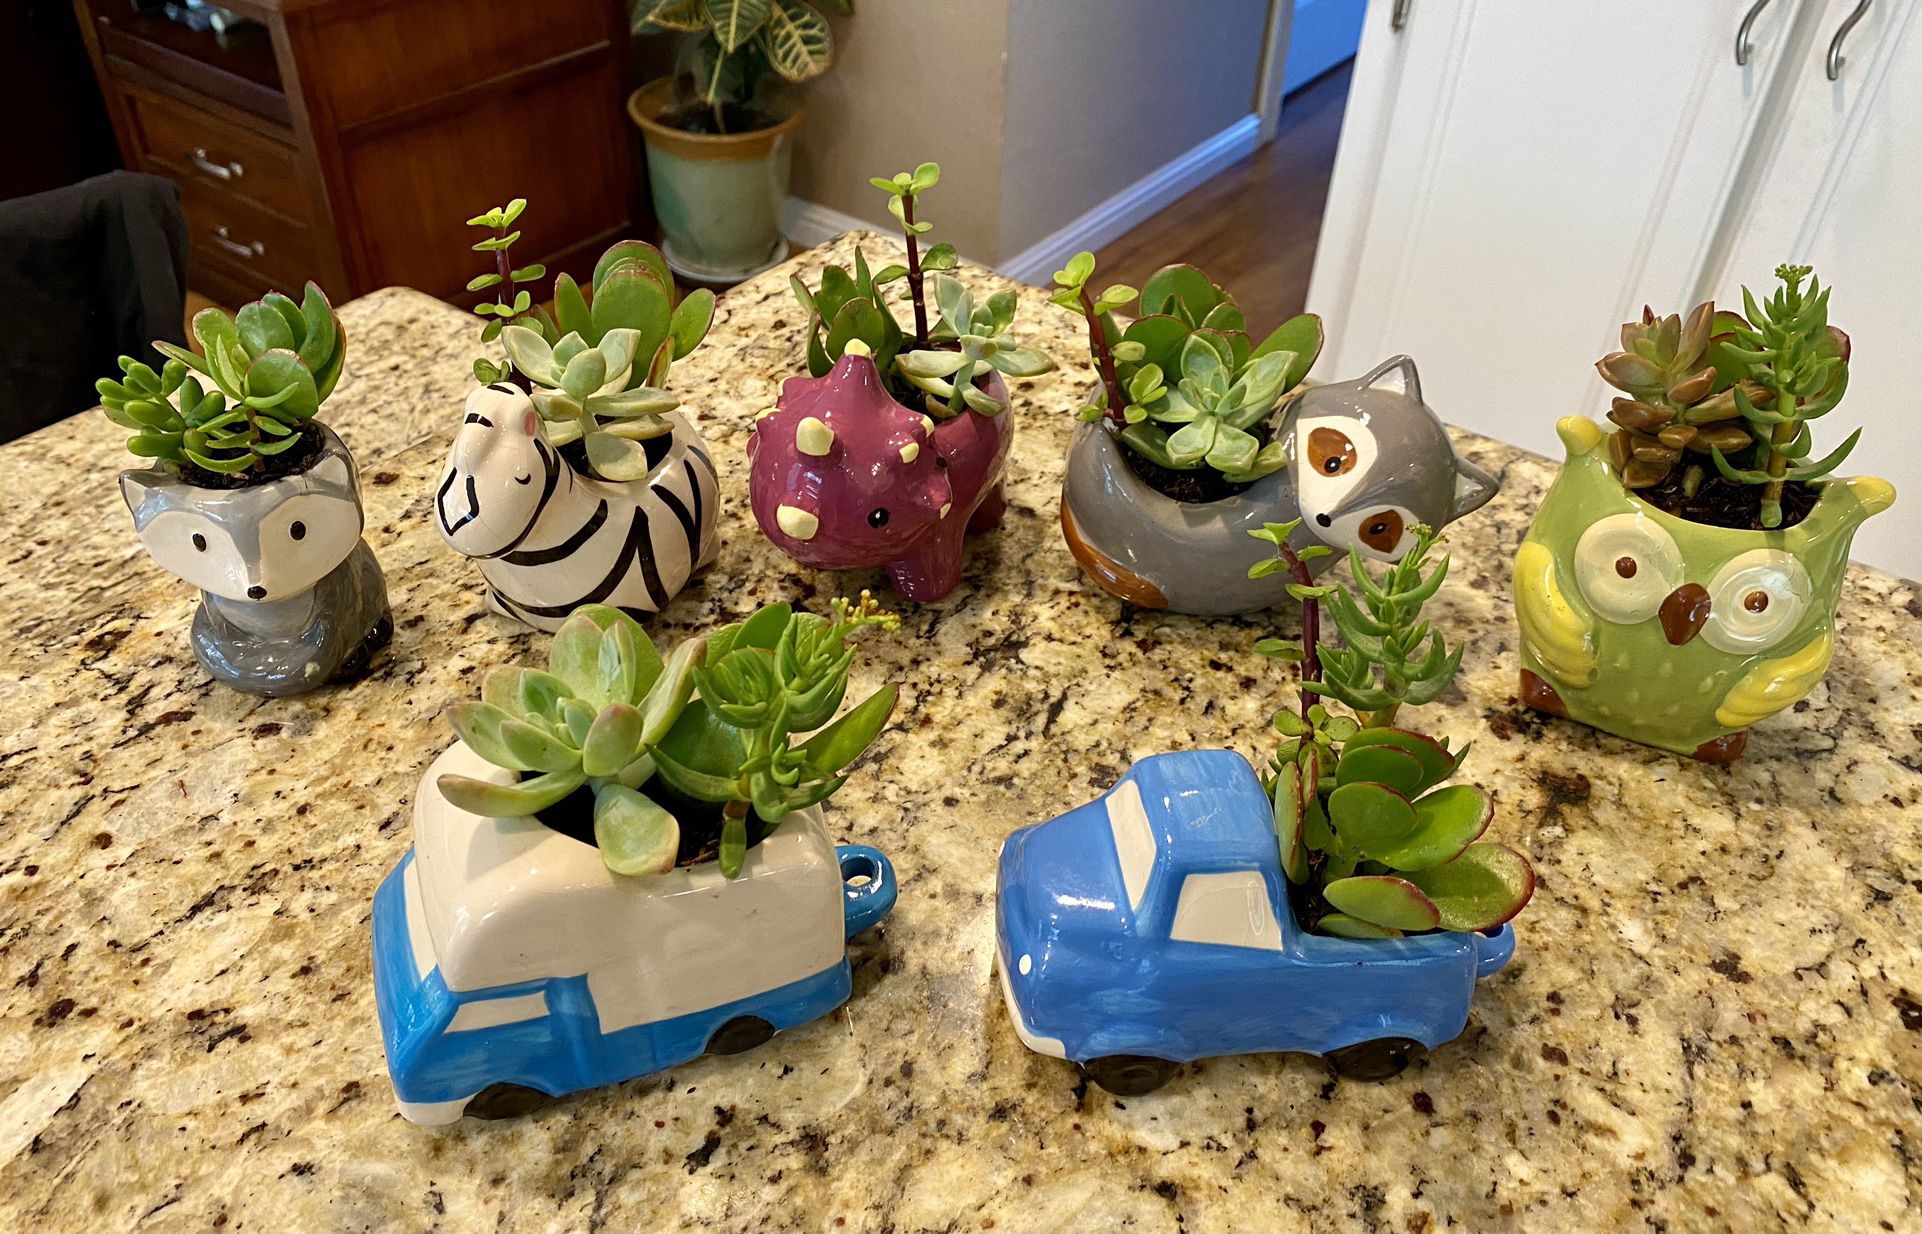 REDUCED! - Adorable Ceramic Animal and Truck Pots Filled with Live Succulent Plants - $5 Each